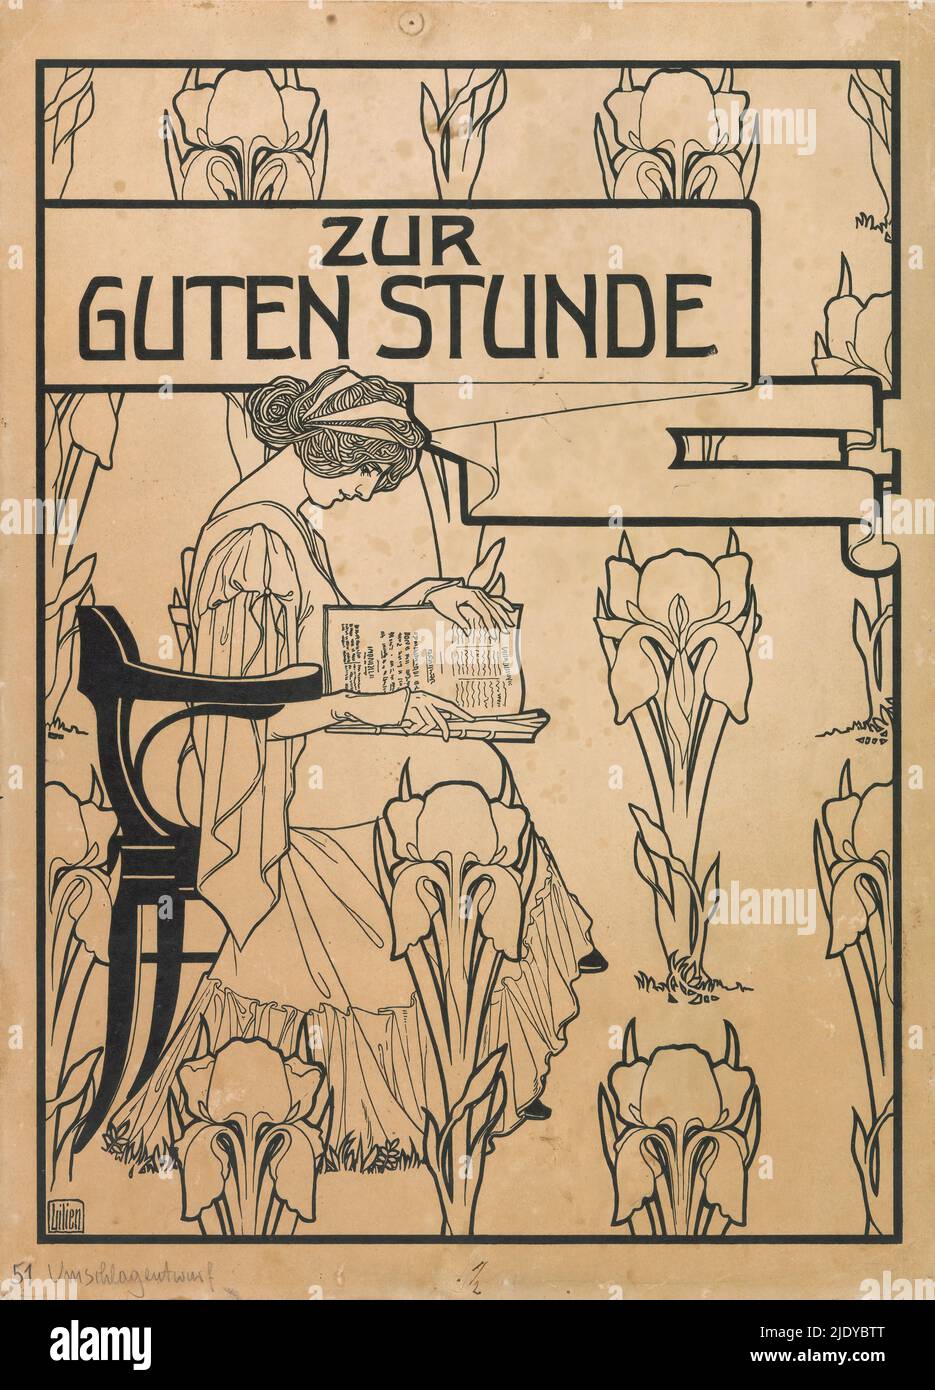 Design for the cover of the magazine Zur guten Stunde, Zur guten Stunde (title on object), Woman seated on a chair, reading in a book or magazine lying on her lap. Stylized lilies all around., print maker: Ephraim Moshe Lilien, (mentioned on object), 1887 - 1919, paper, height 405 mm × width 294 mm Stock Photo